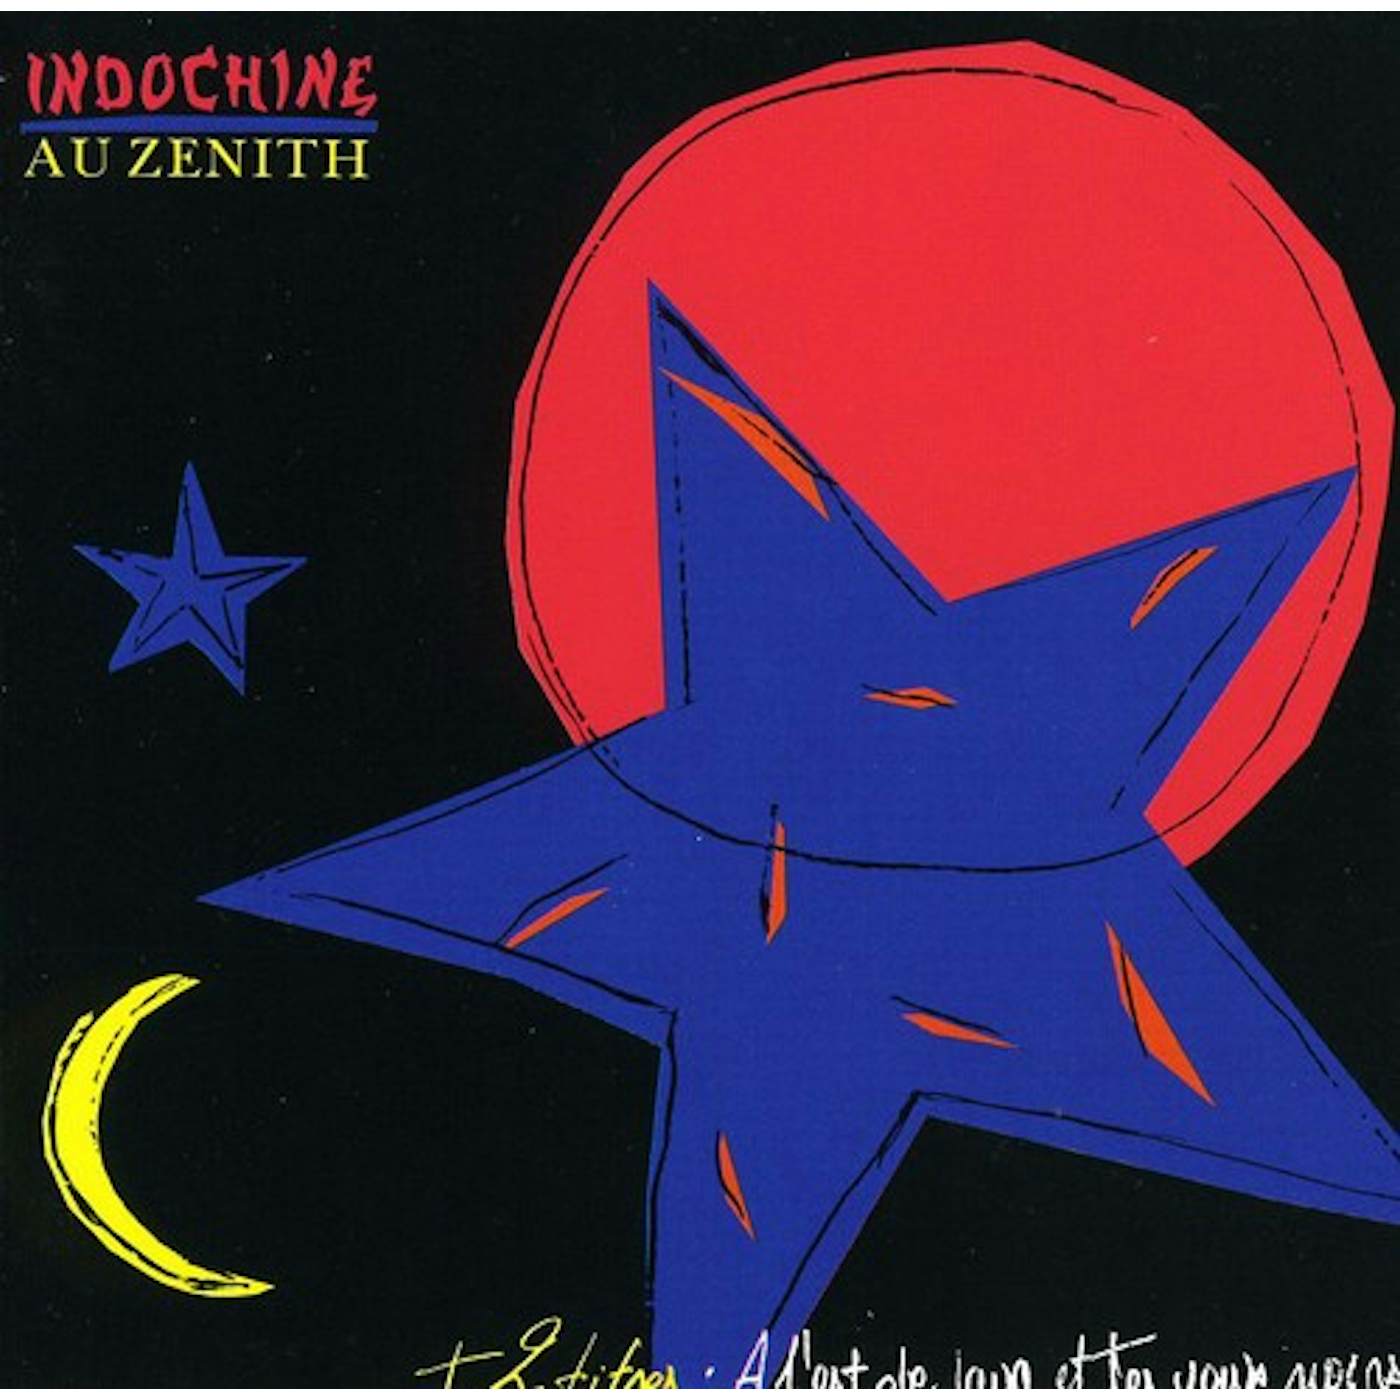 Indochine LIVE AT ZENITH 1986 CD